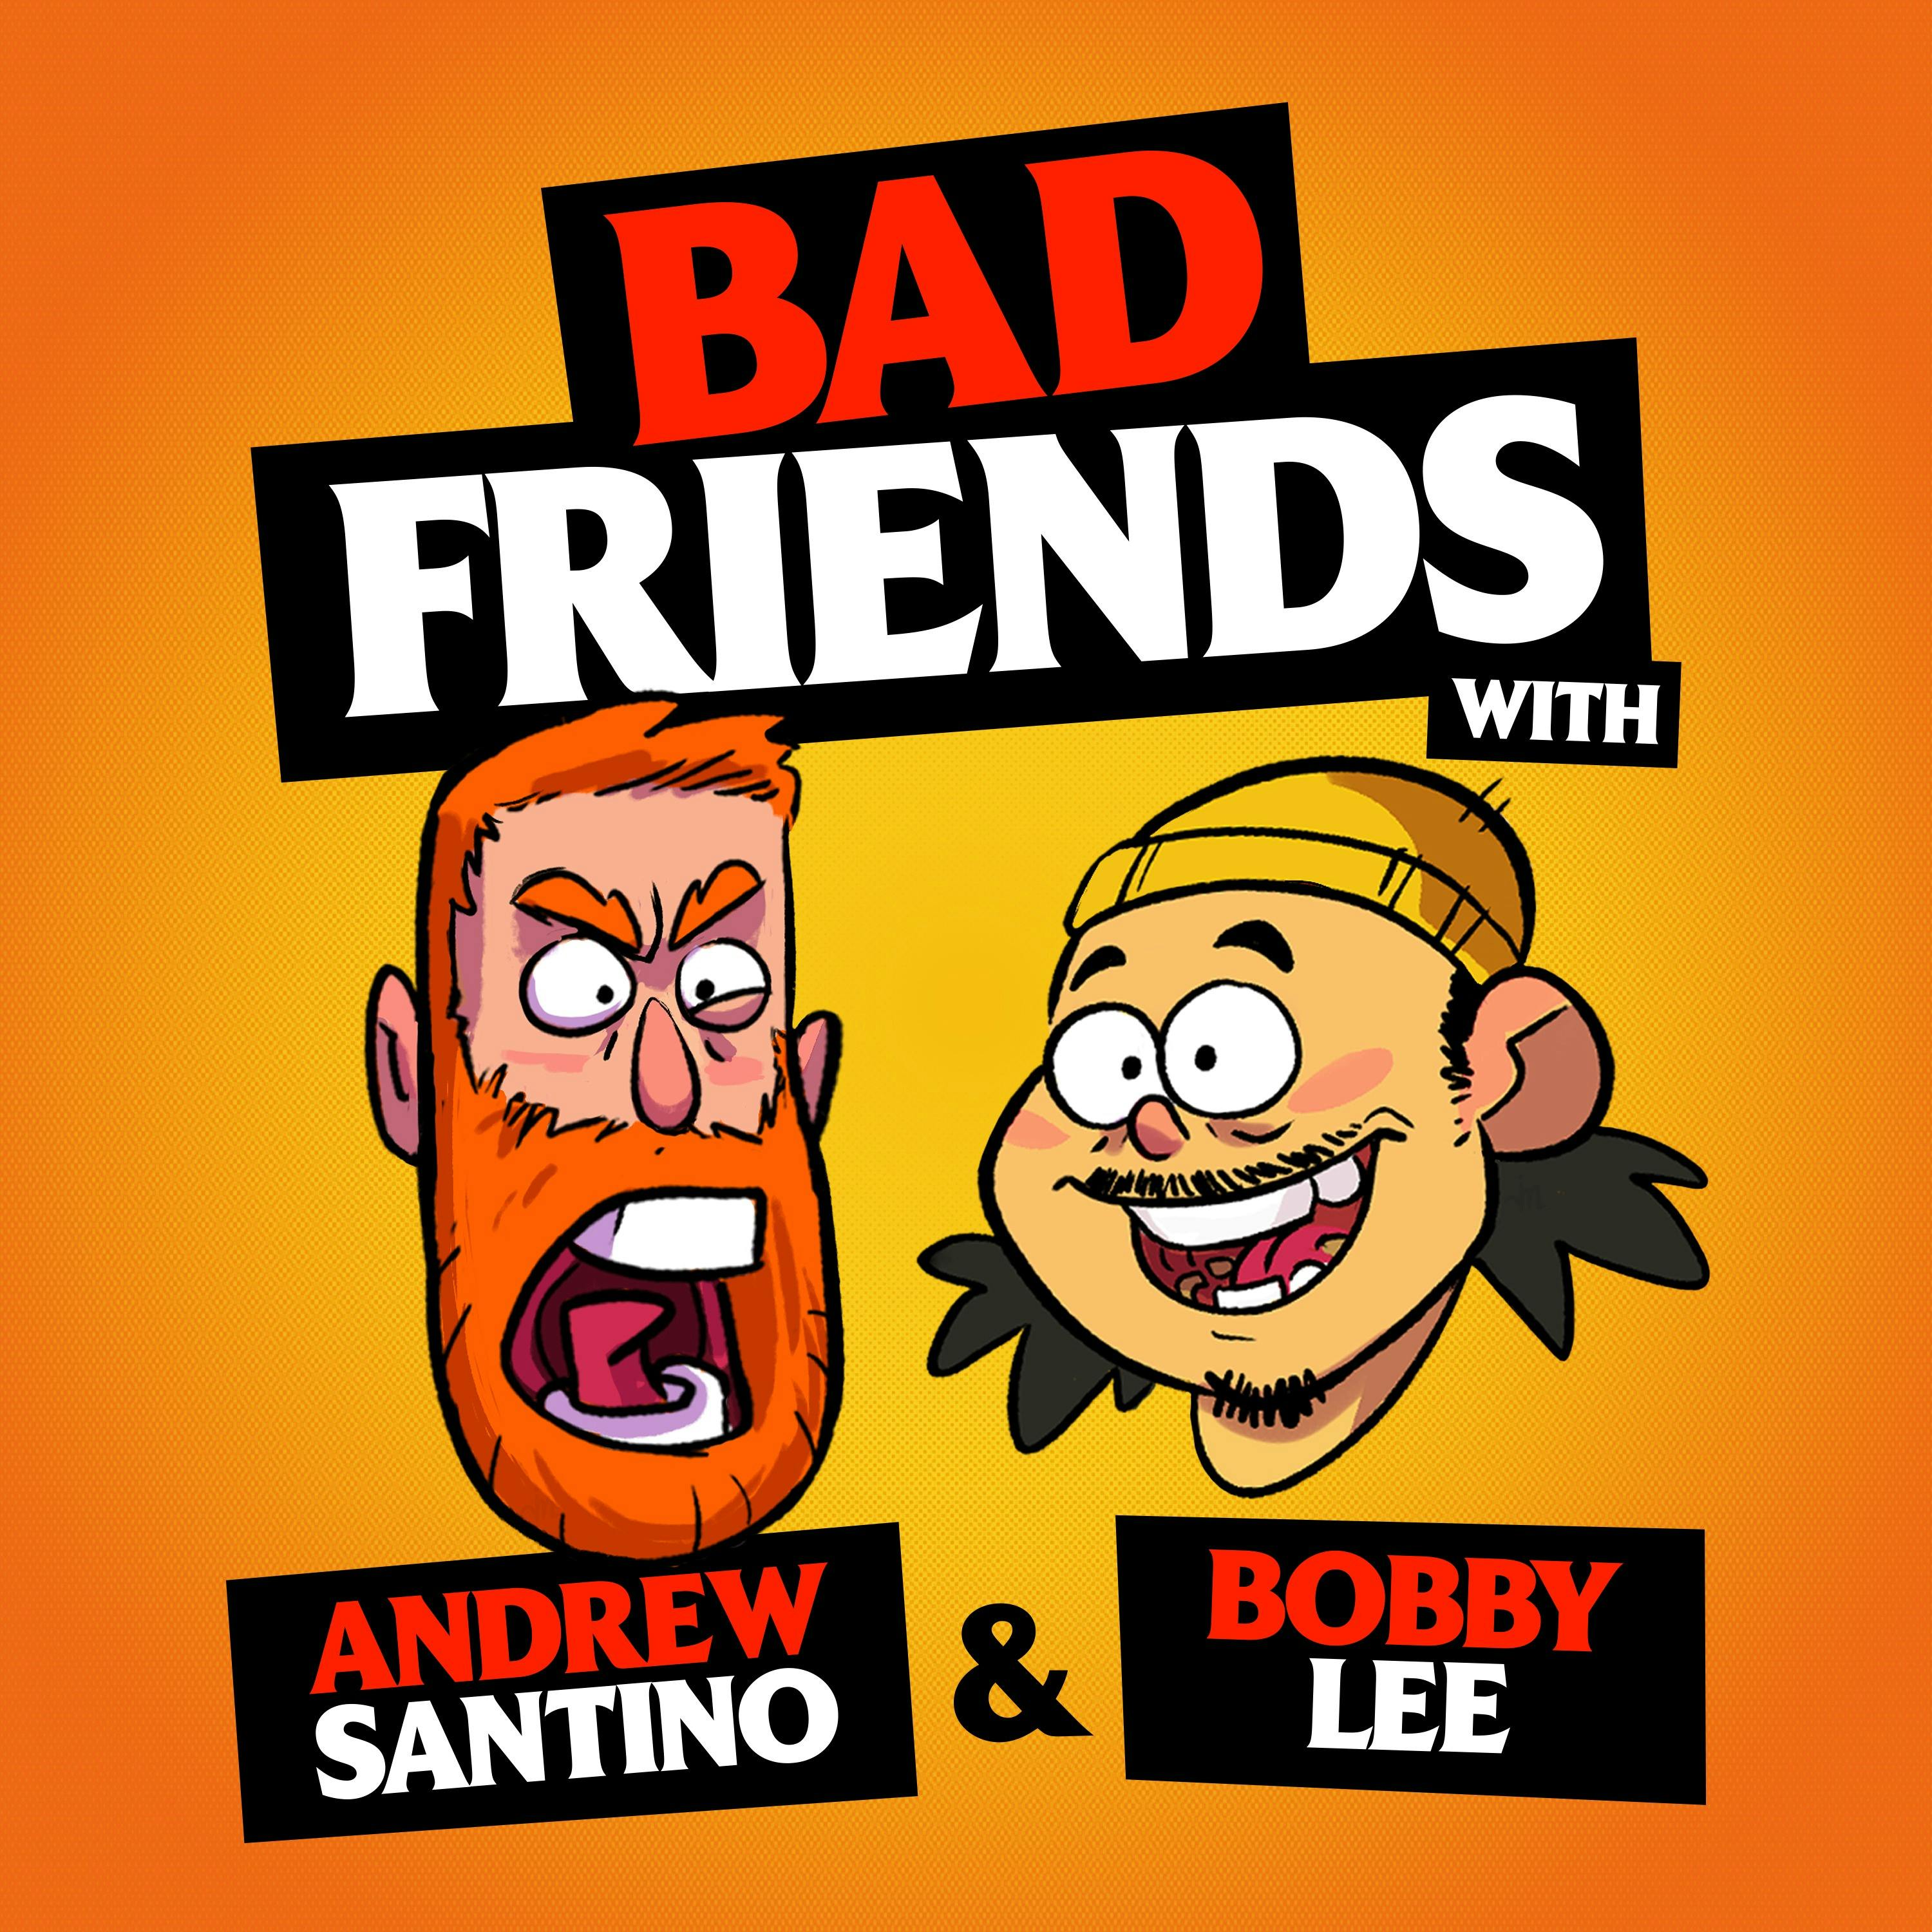 Living Someone's Dream and Chris Rock Hates Us! by Andrew Santino and Bobby Lee